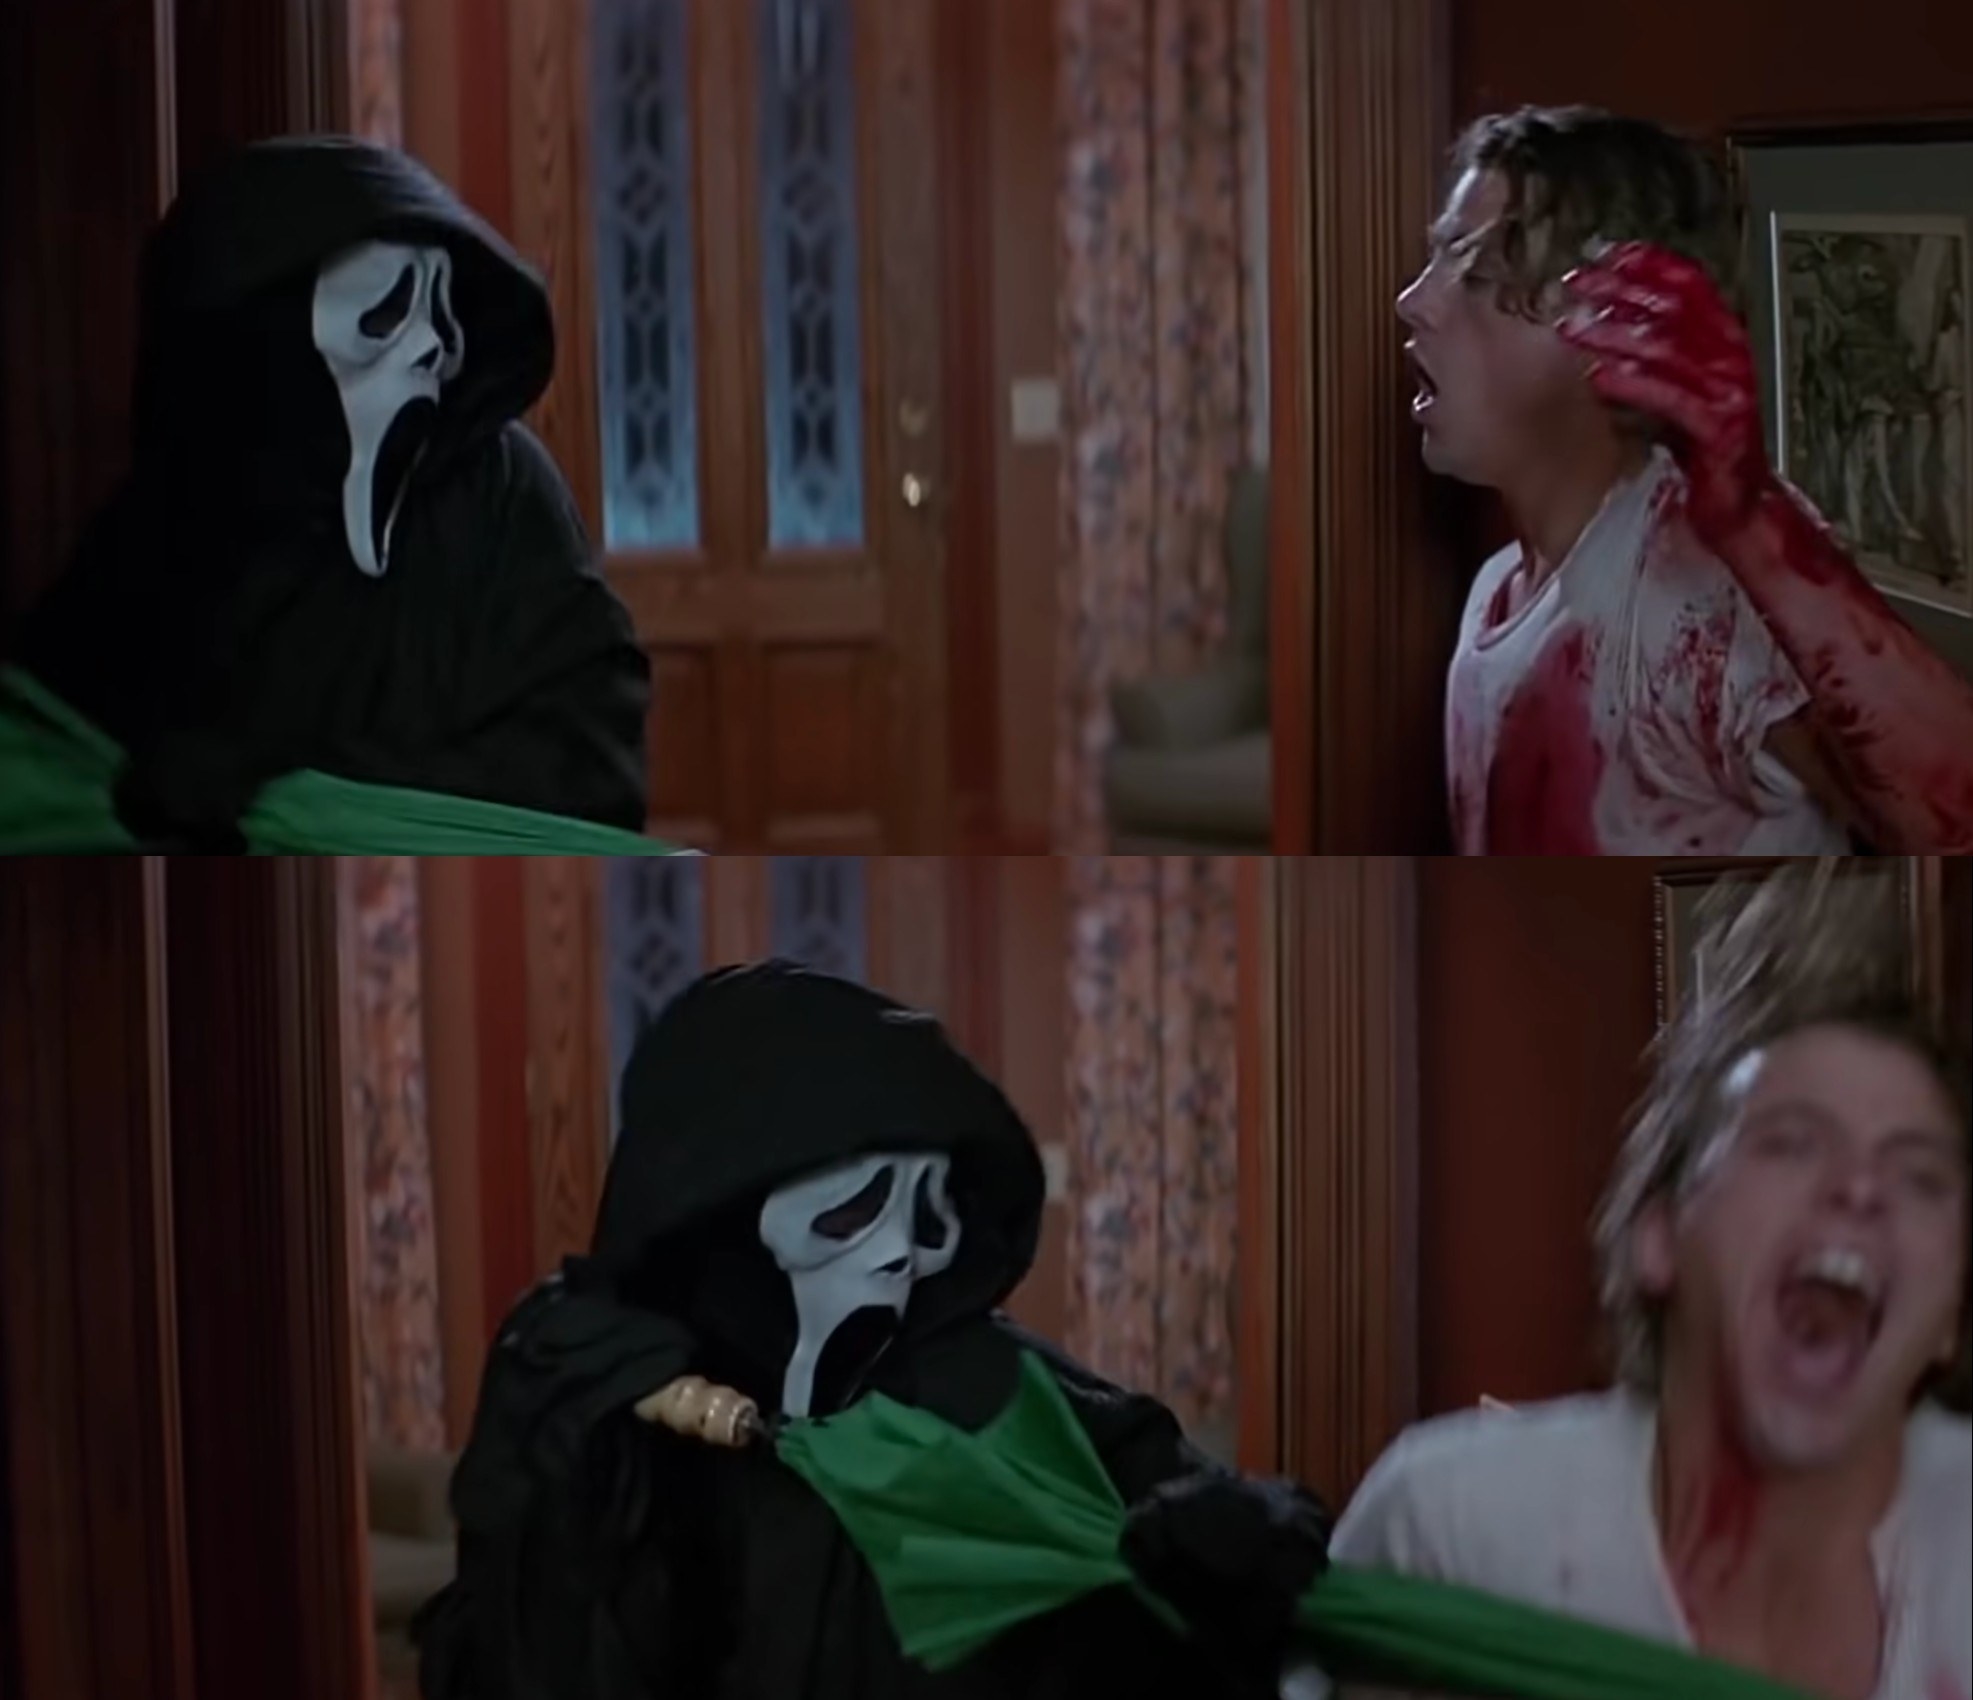 sidney in a ghostface costume stabbing billy with an umbrella in scream